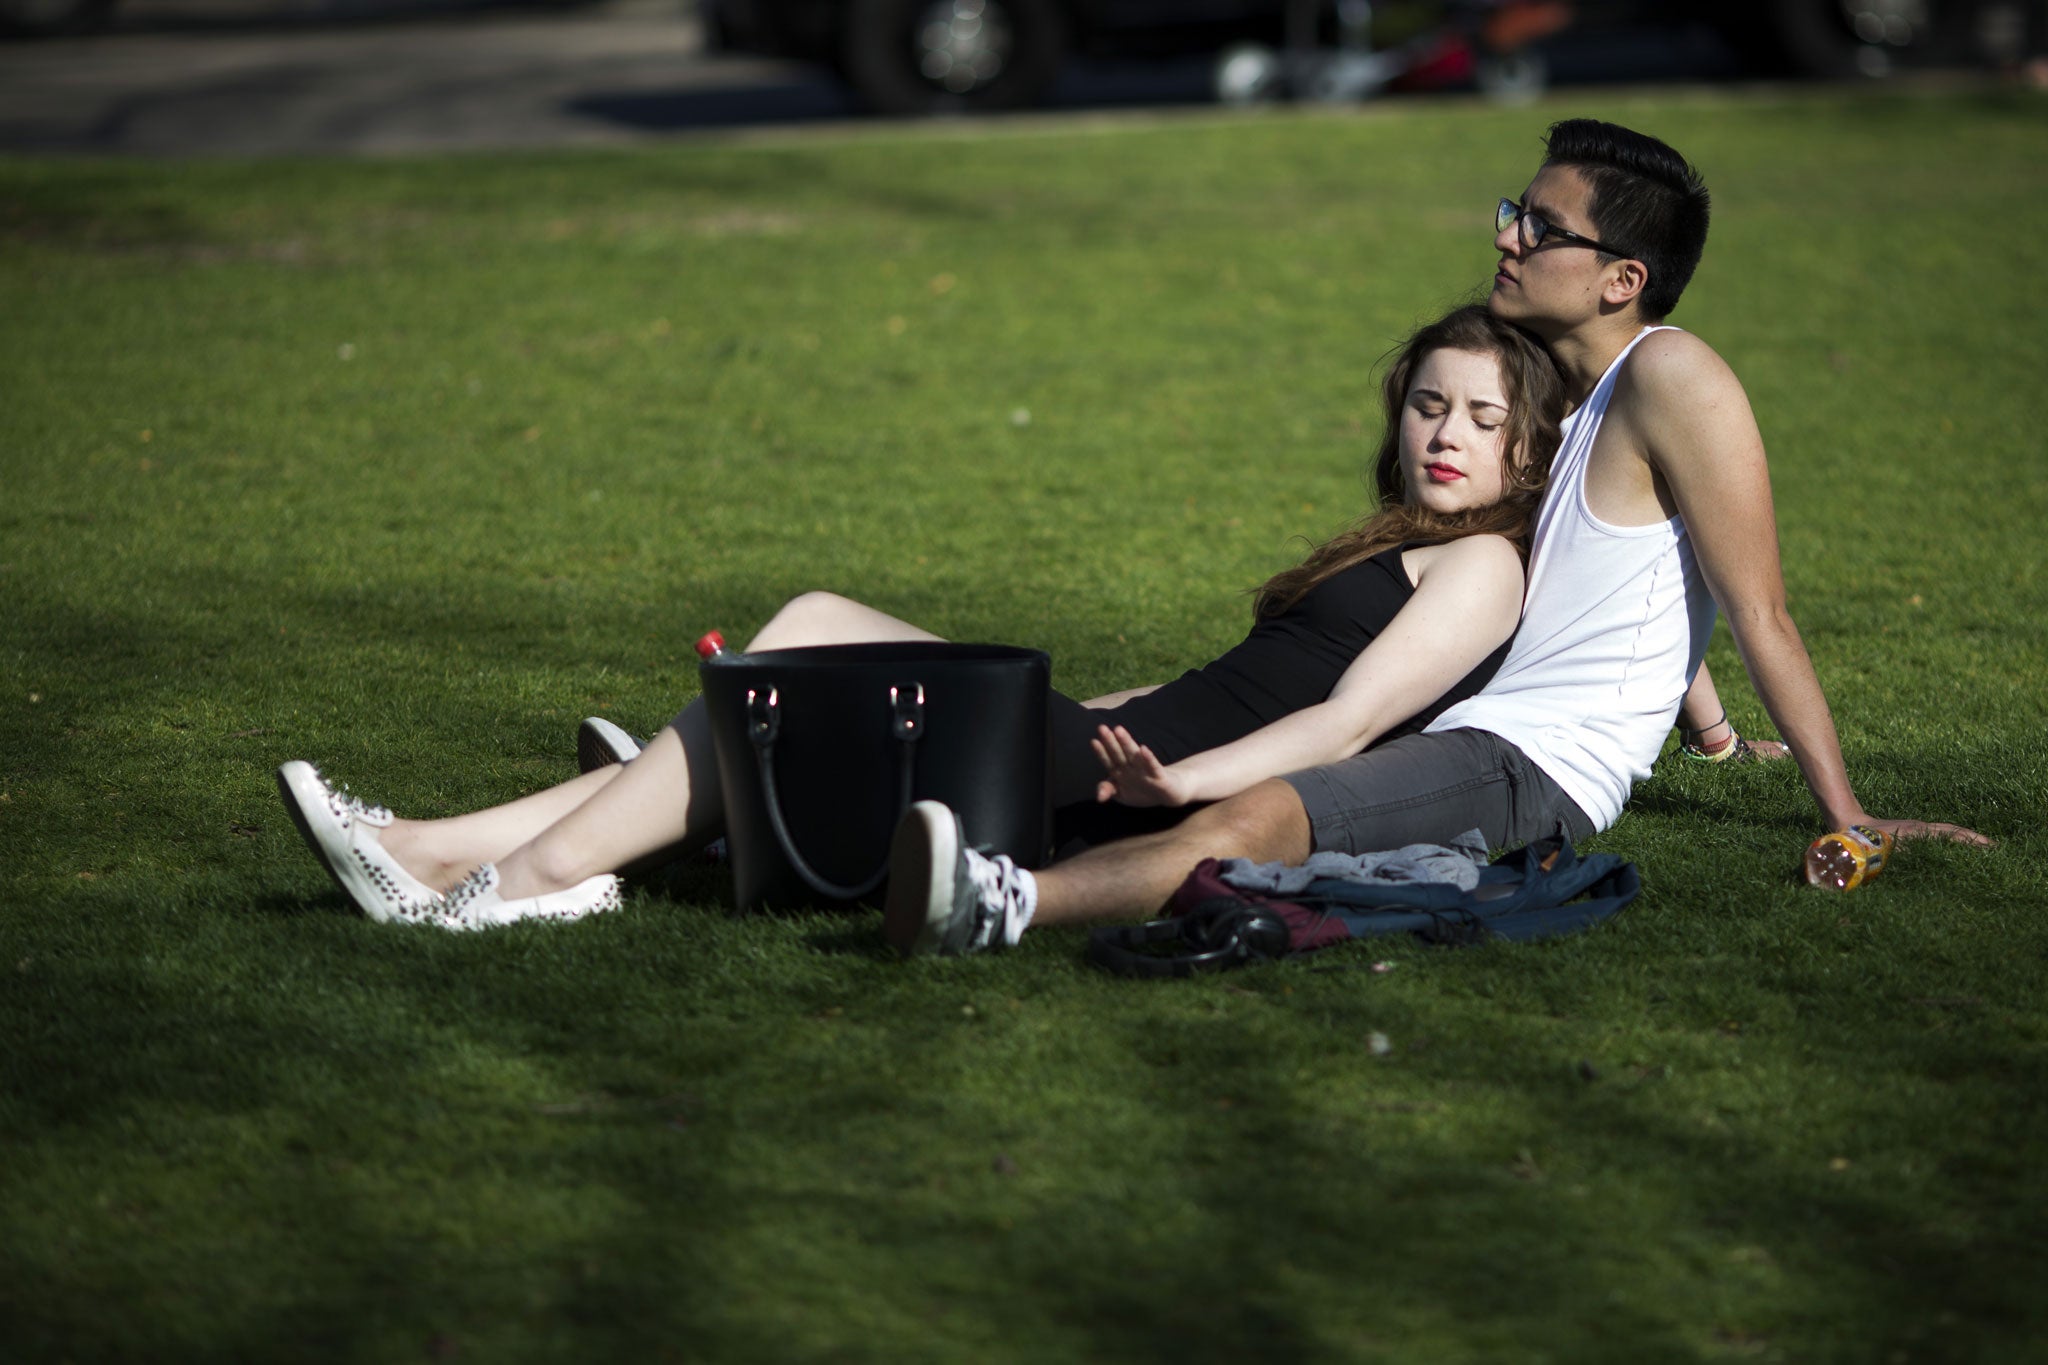 A couple relax in the sunshine in St James Park on 14 April 2015 in London. Today has been the hottest day of the year with temperatures reaching 24C in some parts of the country.